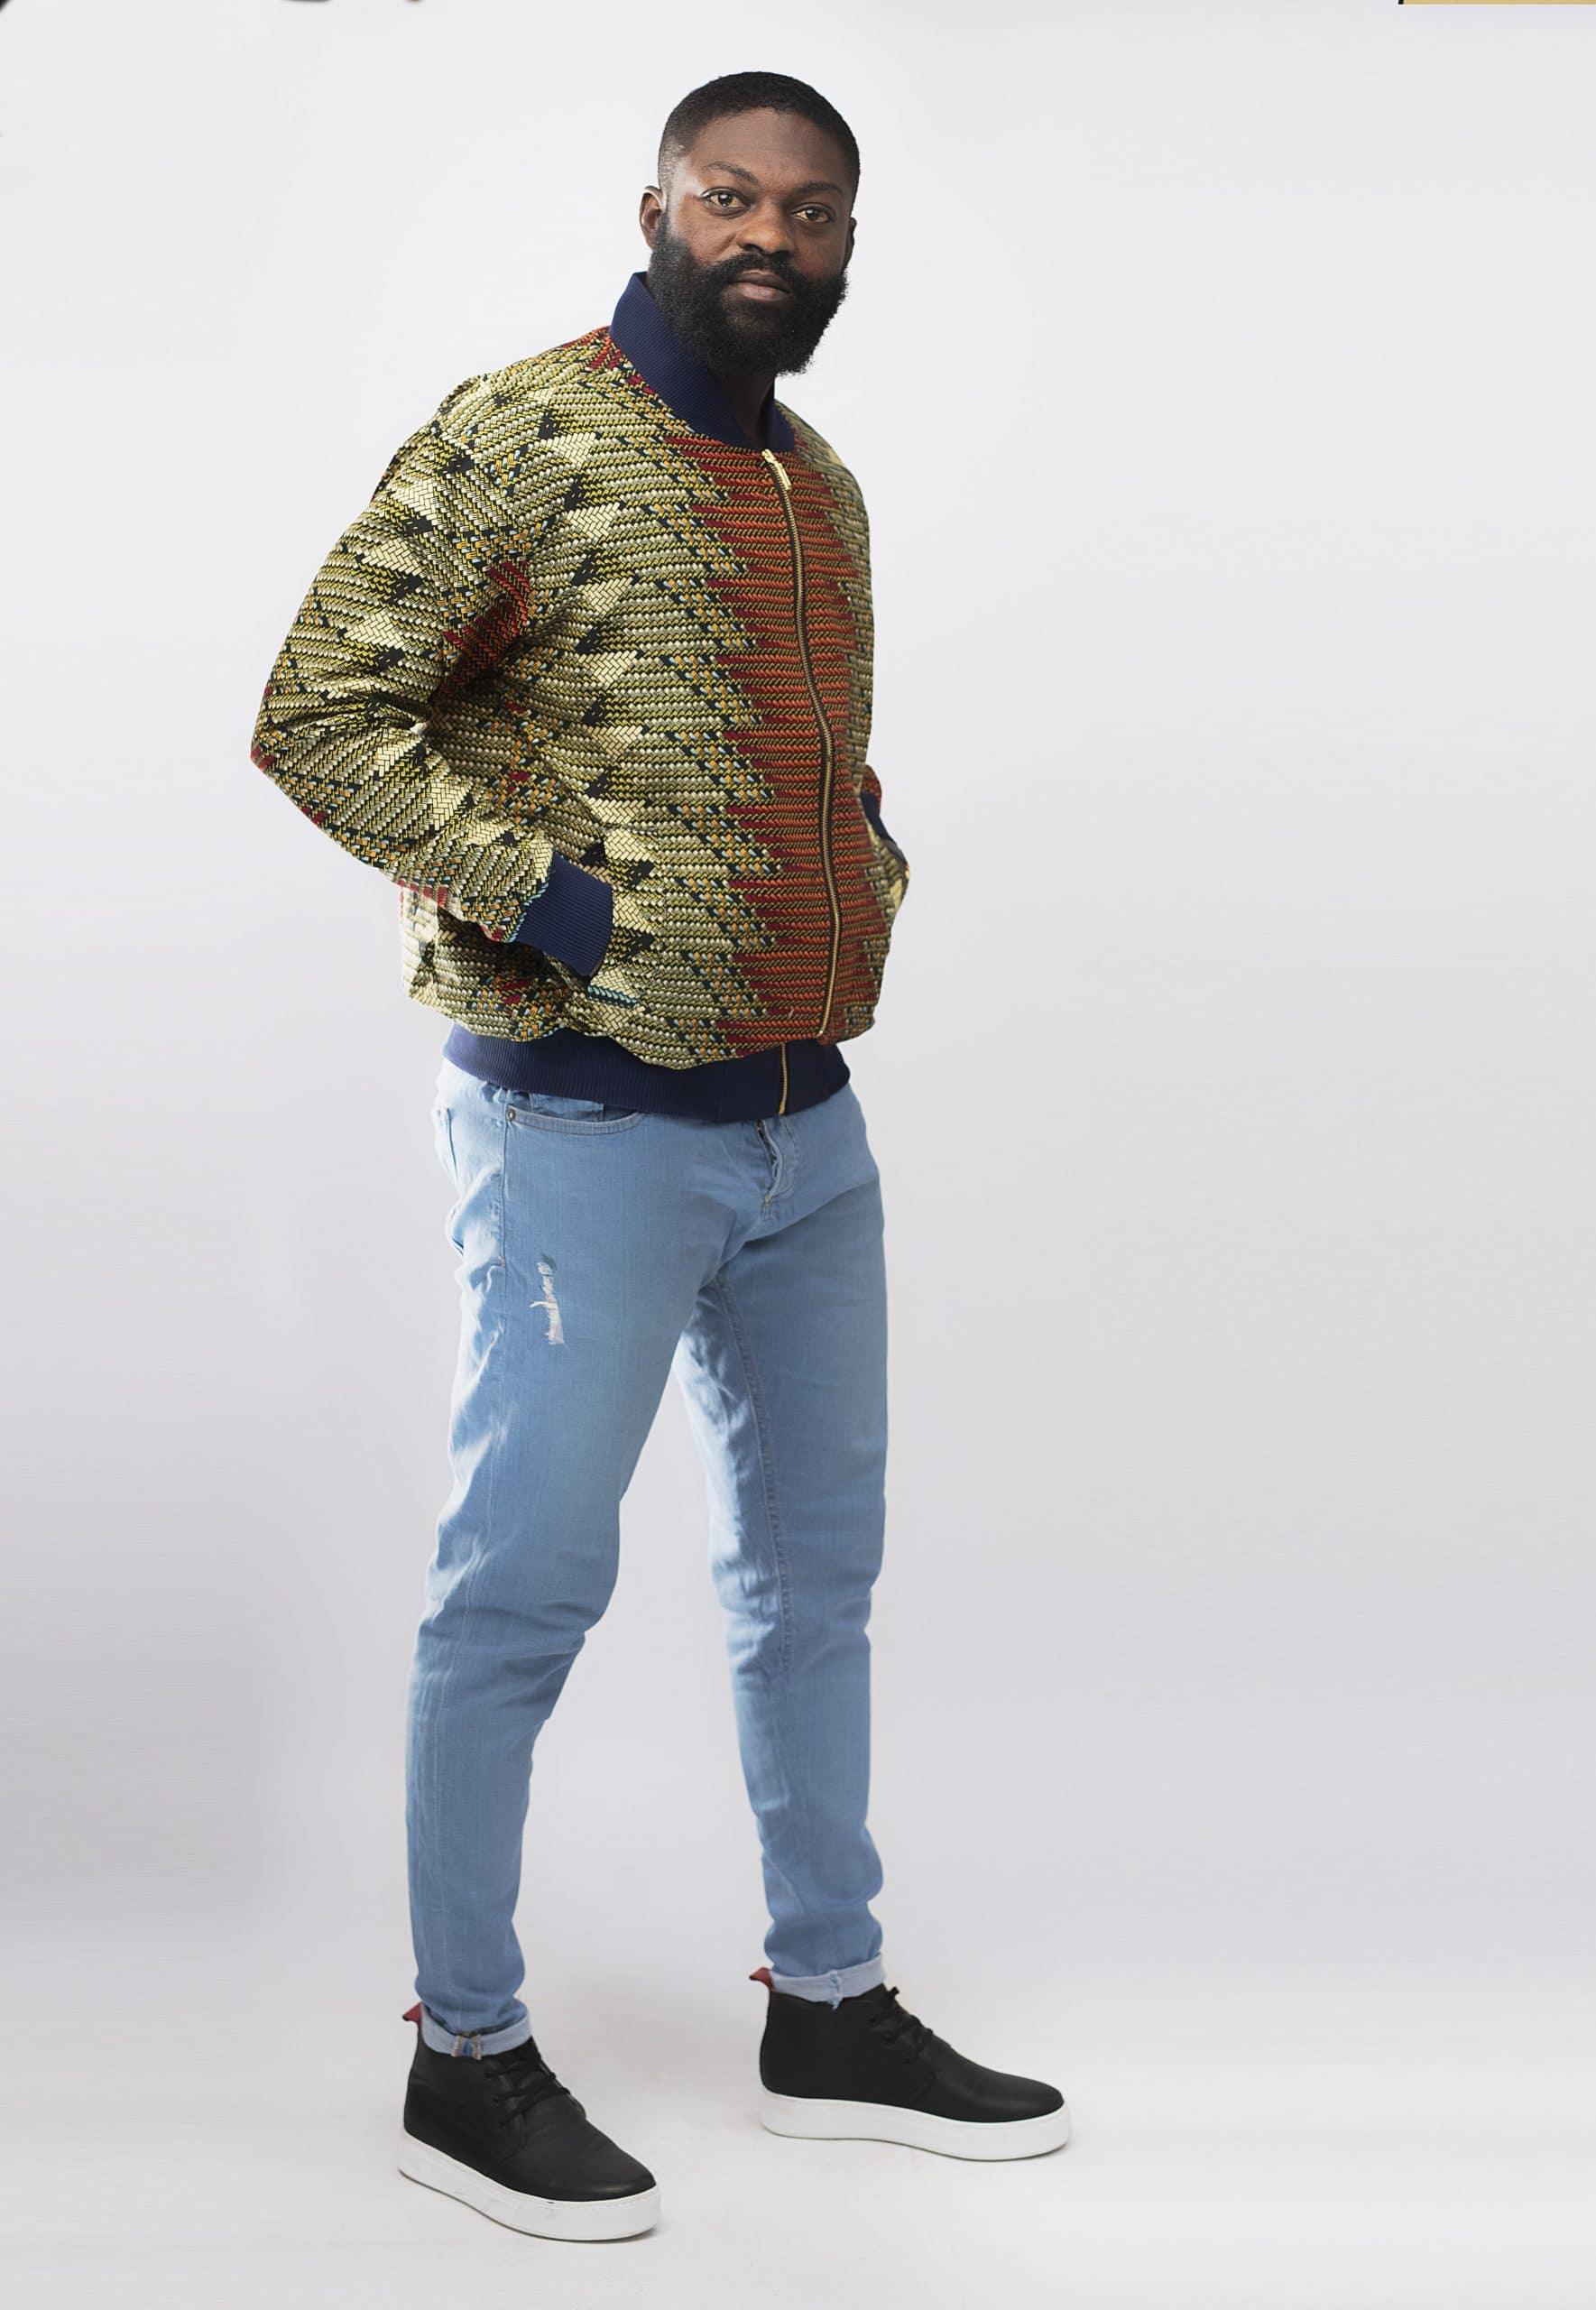 Side shot of model wearing our Abeba men's multi-coloured bomber jacket in all over African print pattern. Featuring 2 side pockets and a navy blue baseball collar and cuffs.